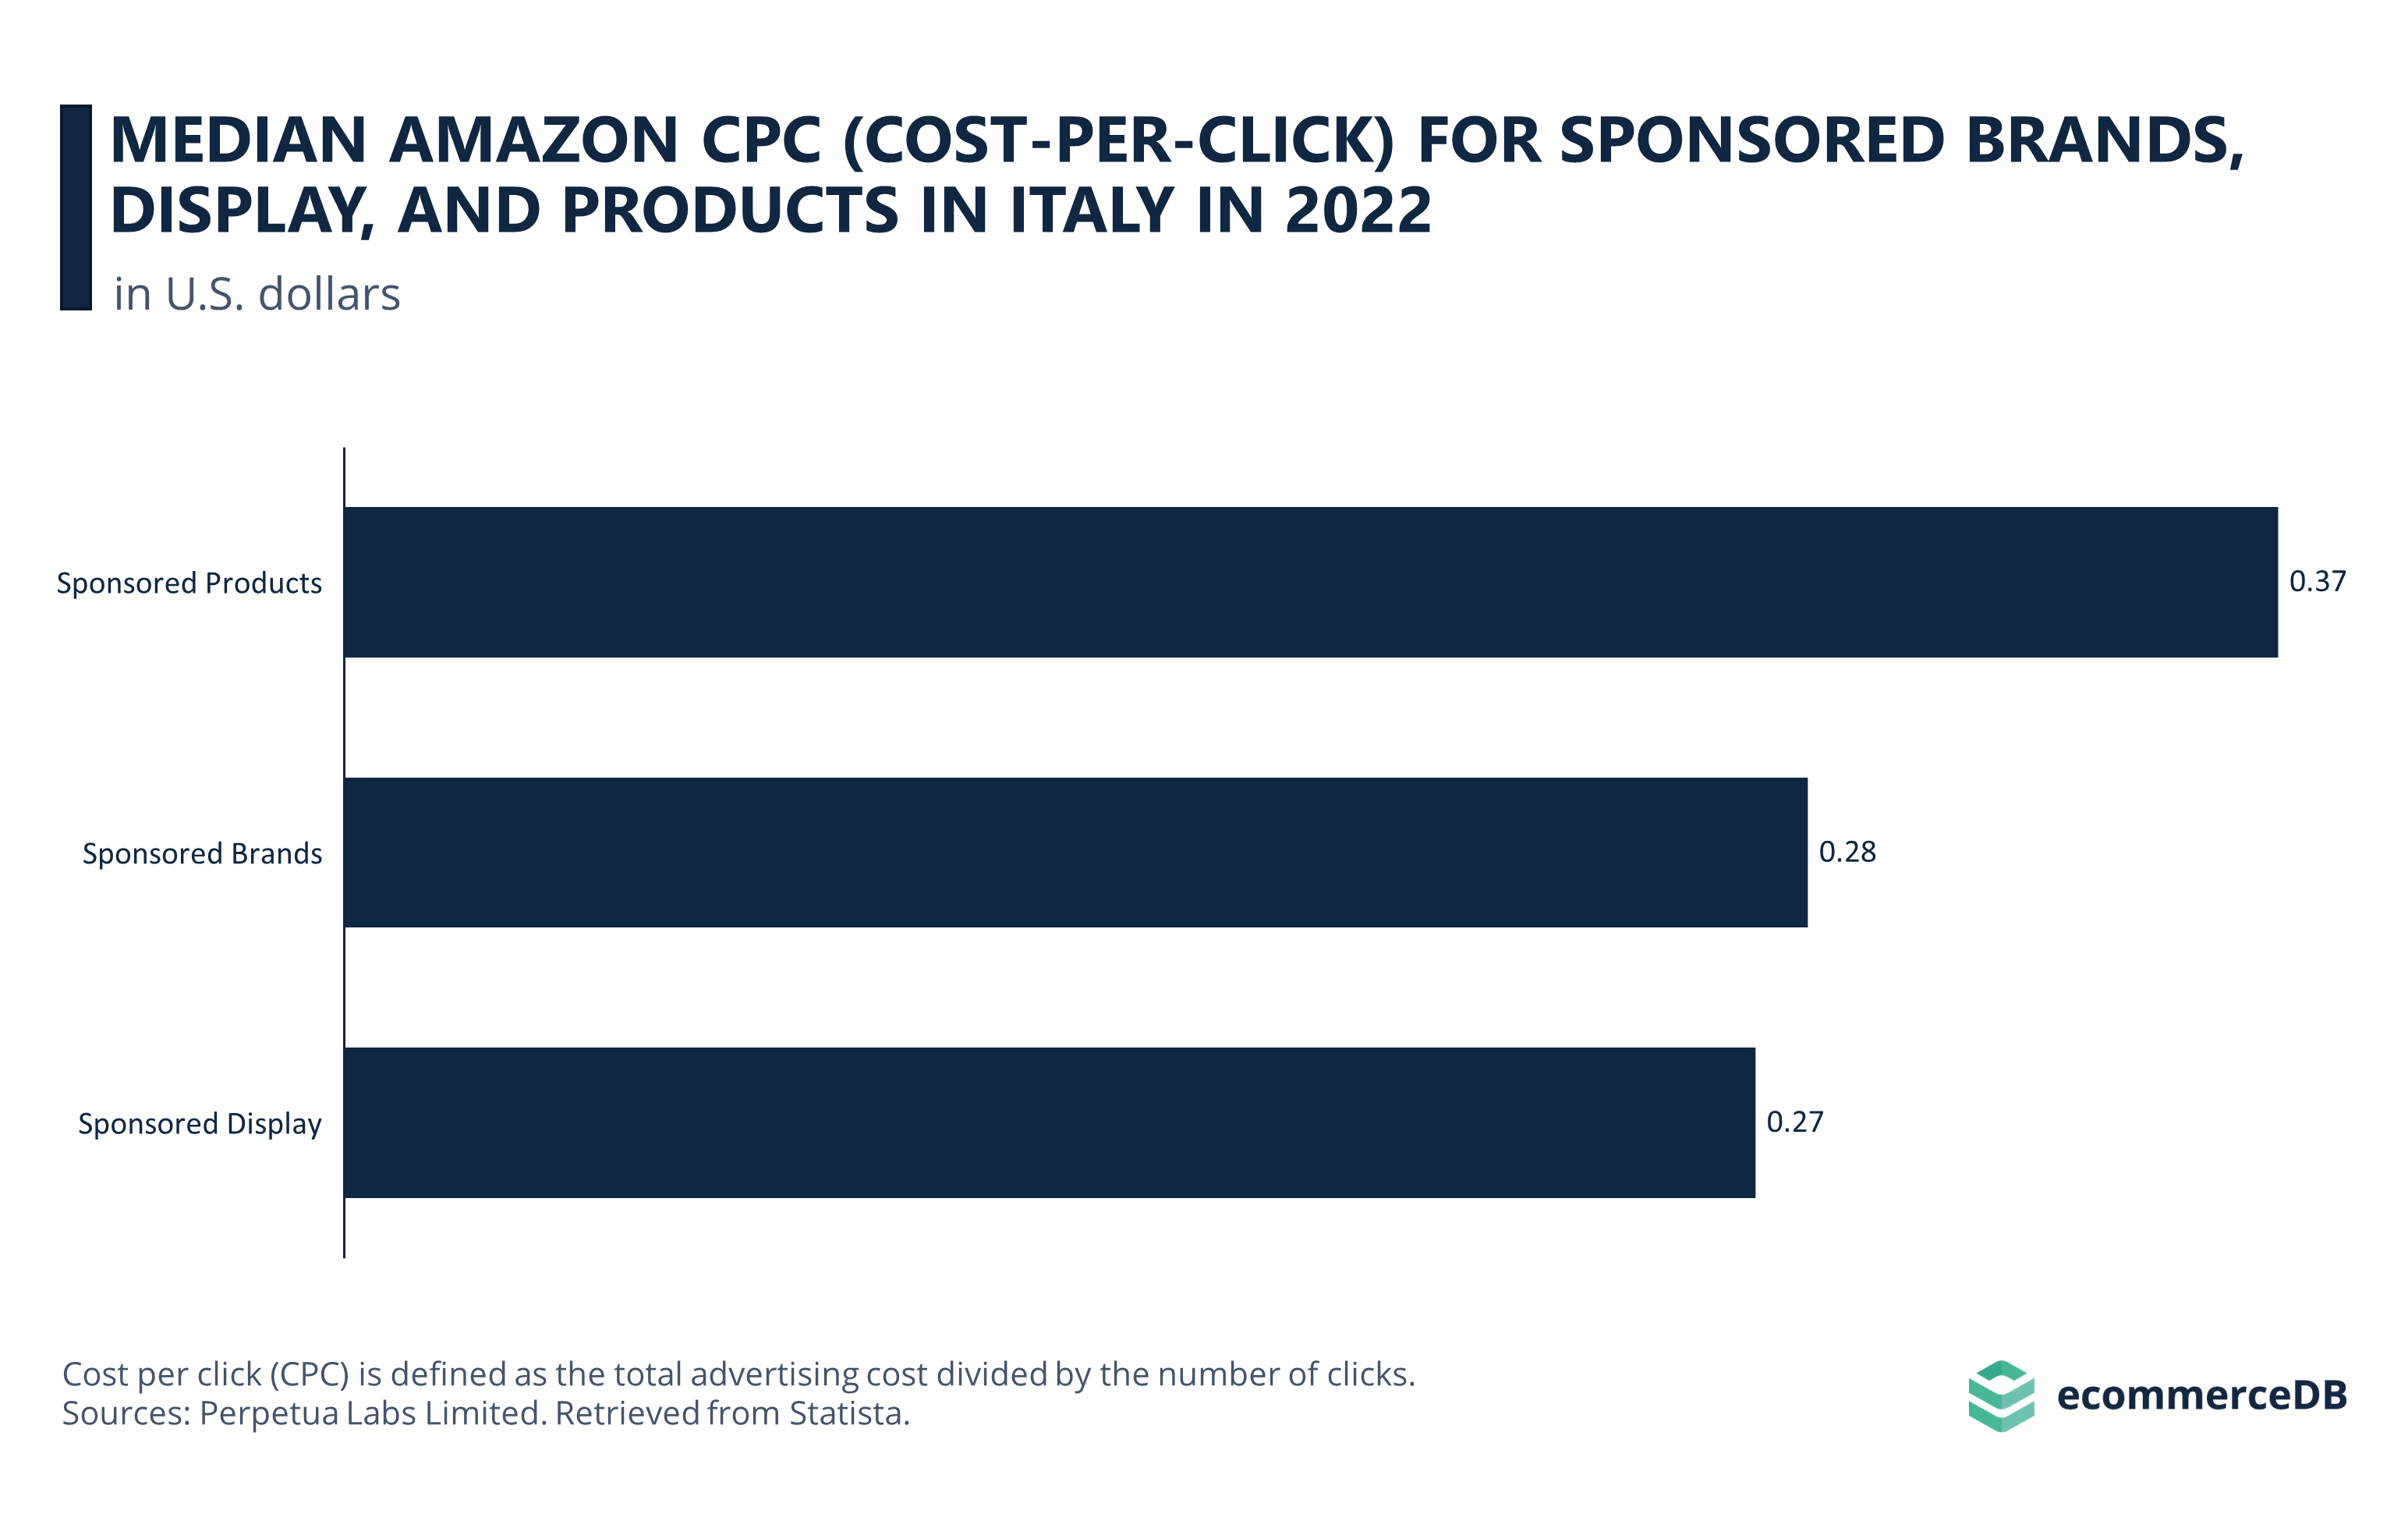 Median Amazon CPC for 3 Ad Types in Italy